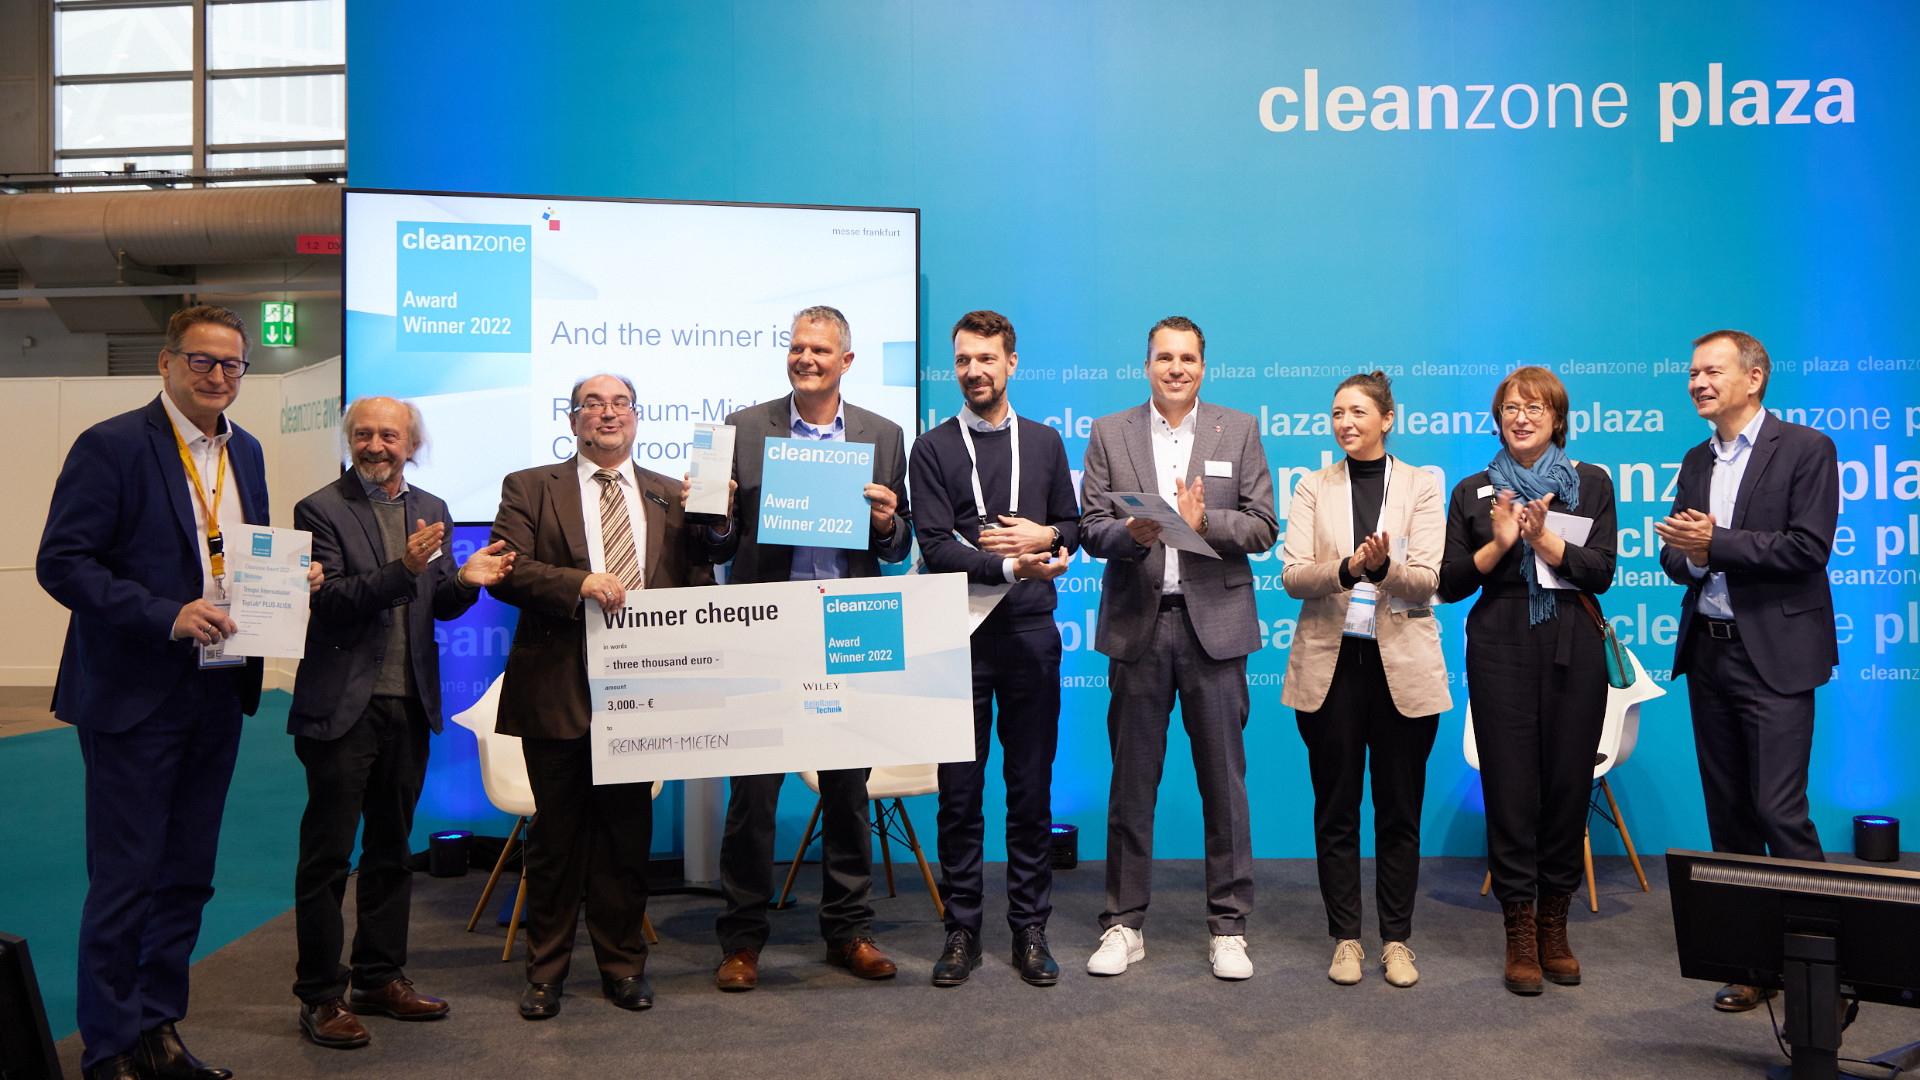 The Cleanzone Award is presented for innovative products or solutions in the cleanroom sector. Source: Messe Frankfurt